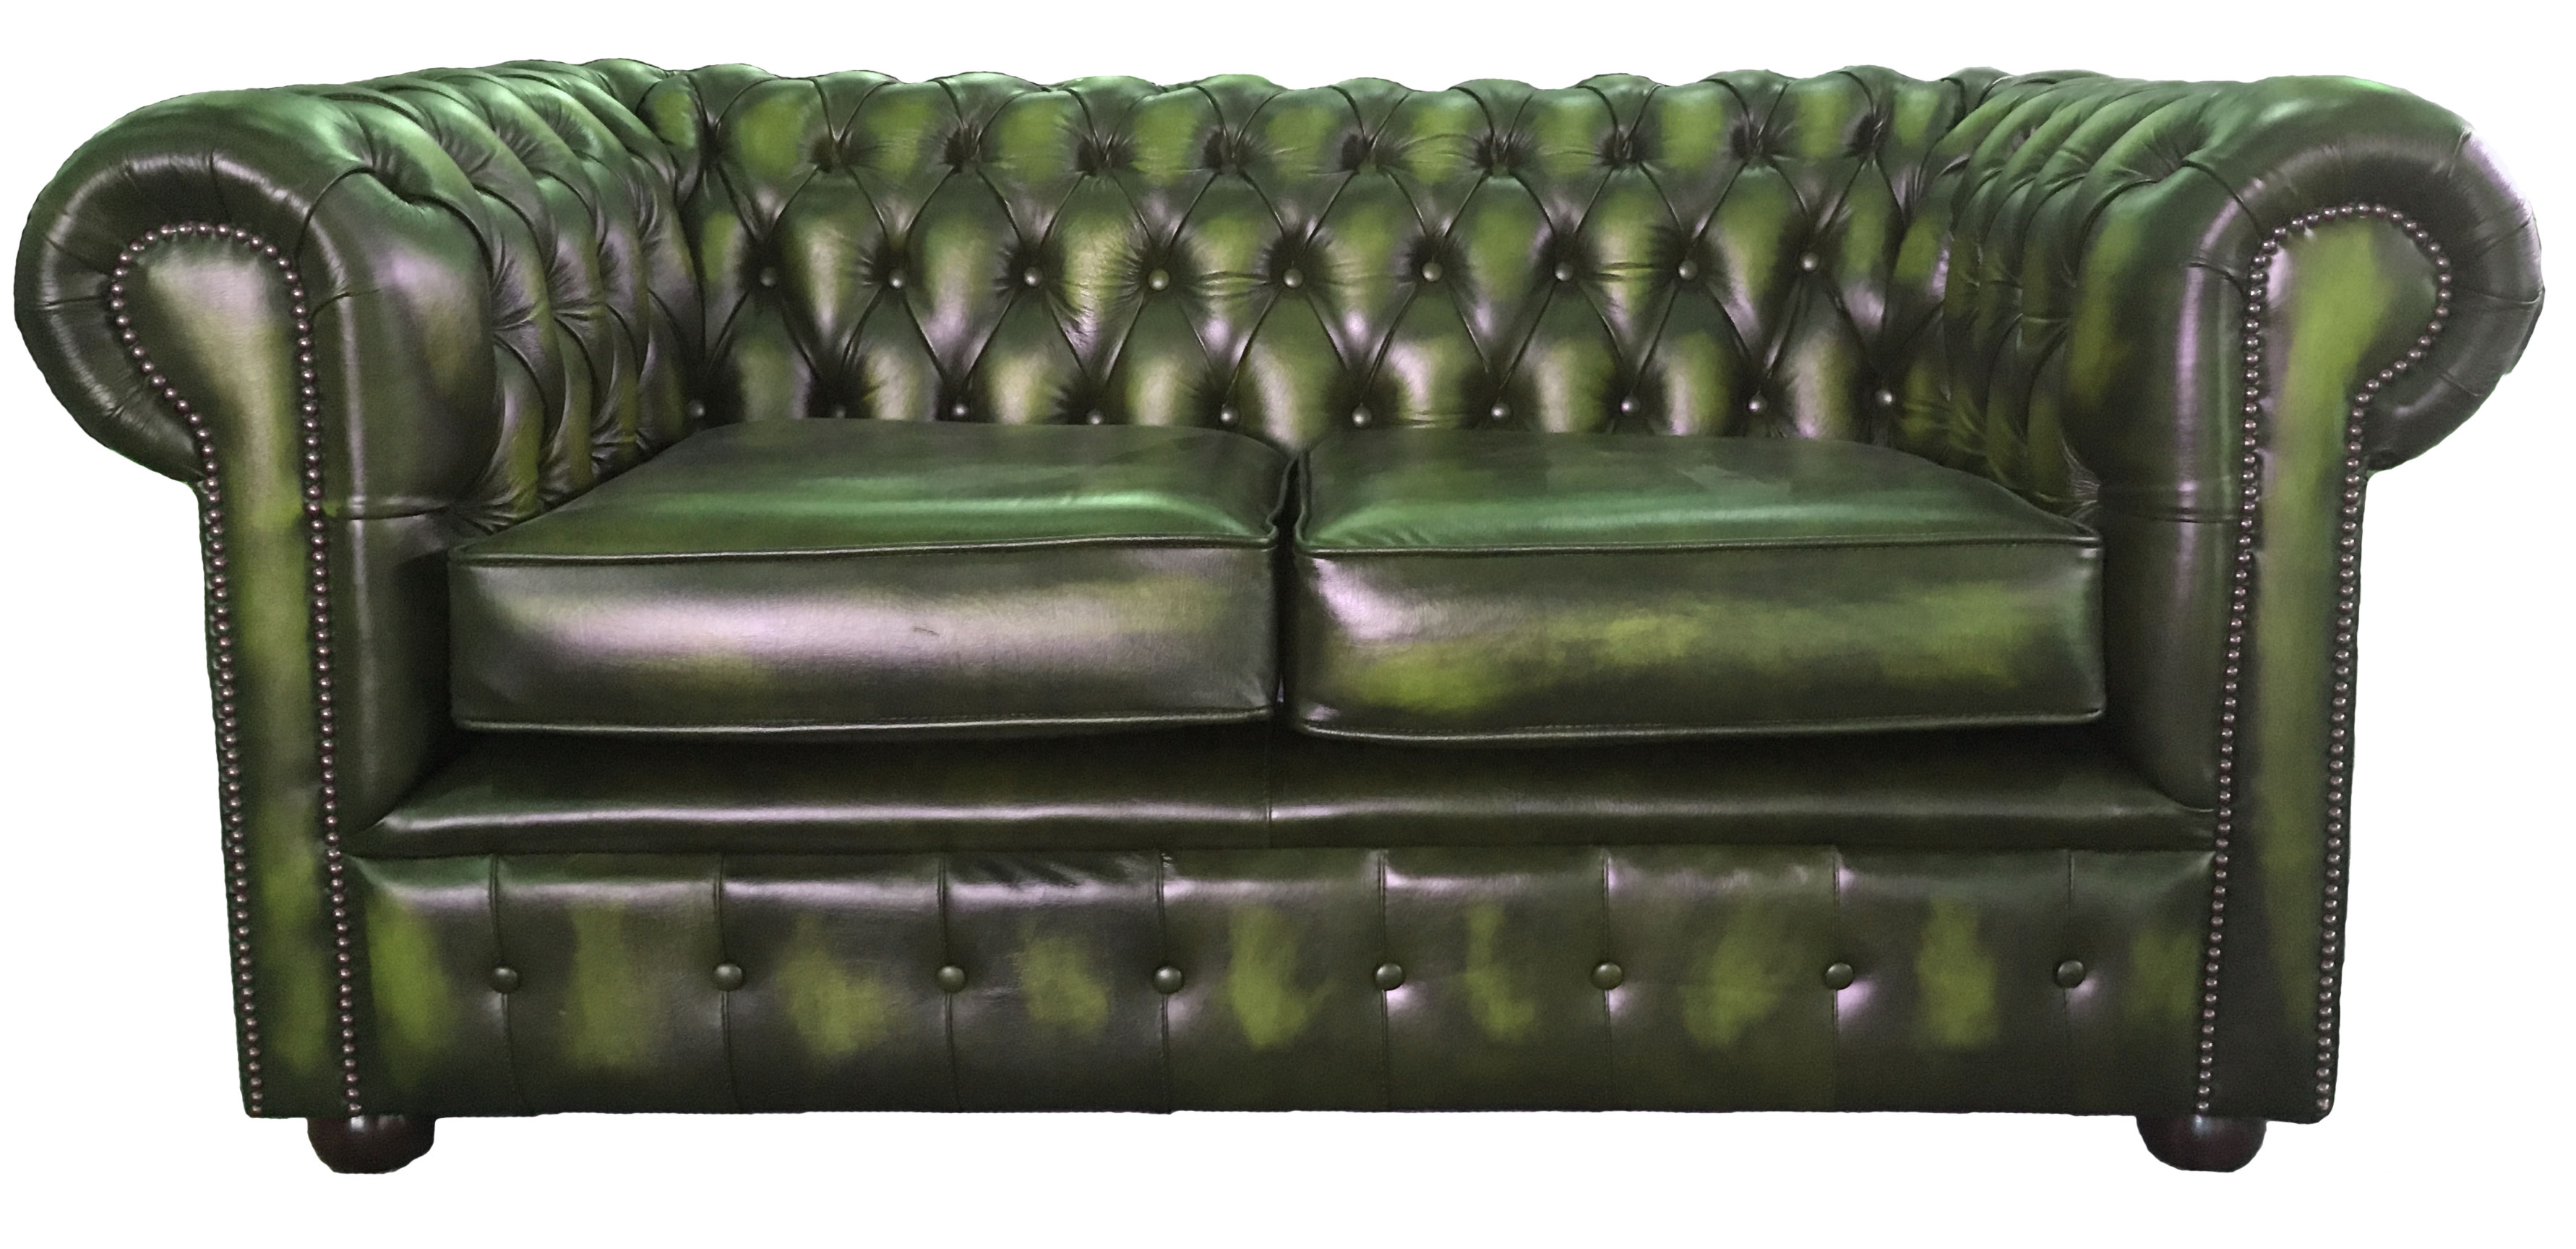 2nd hand chesterfield sofa bed